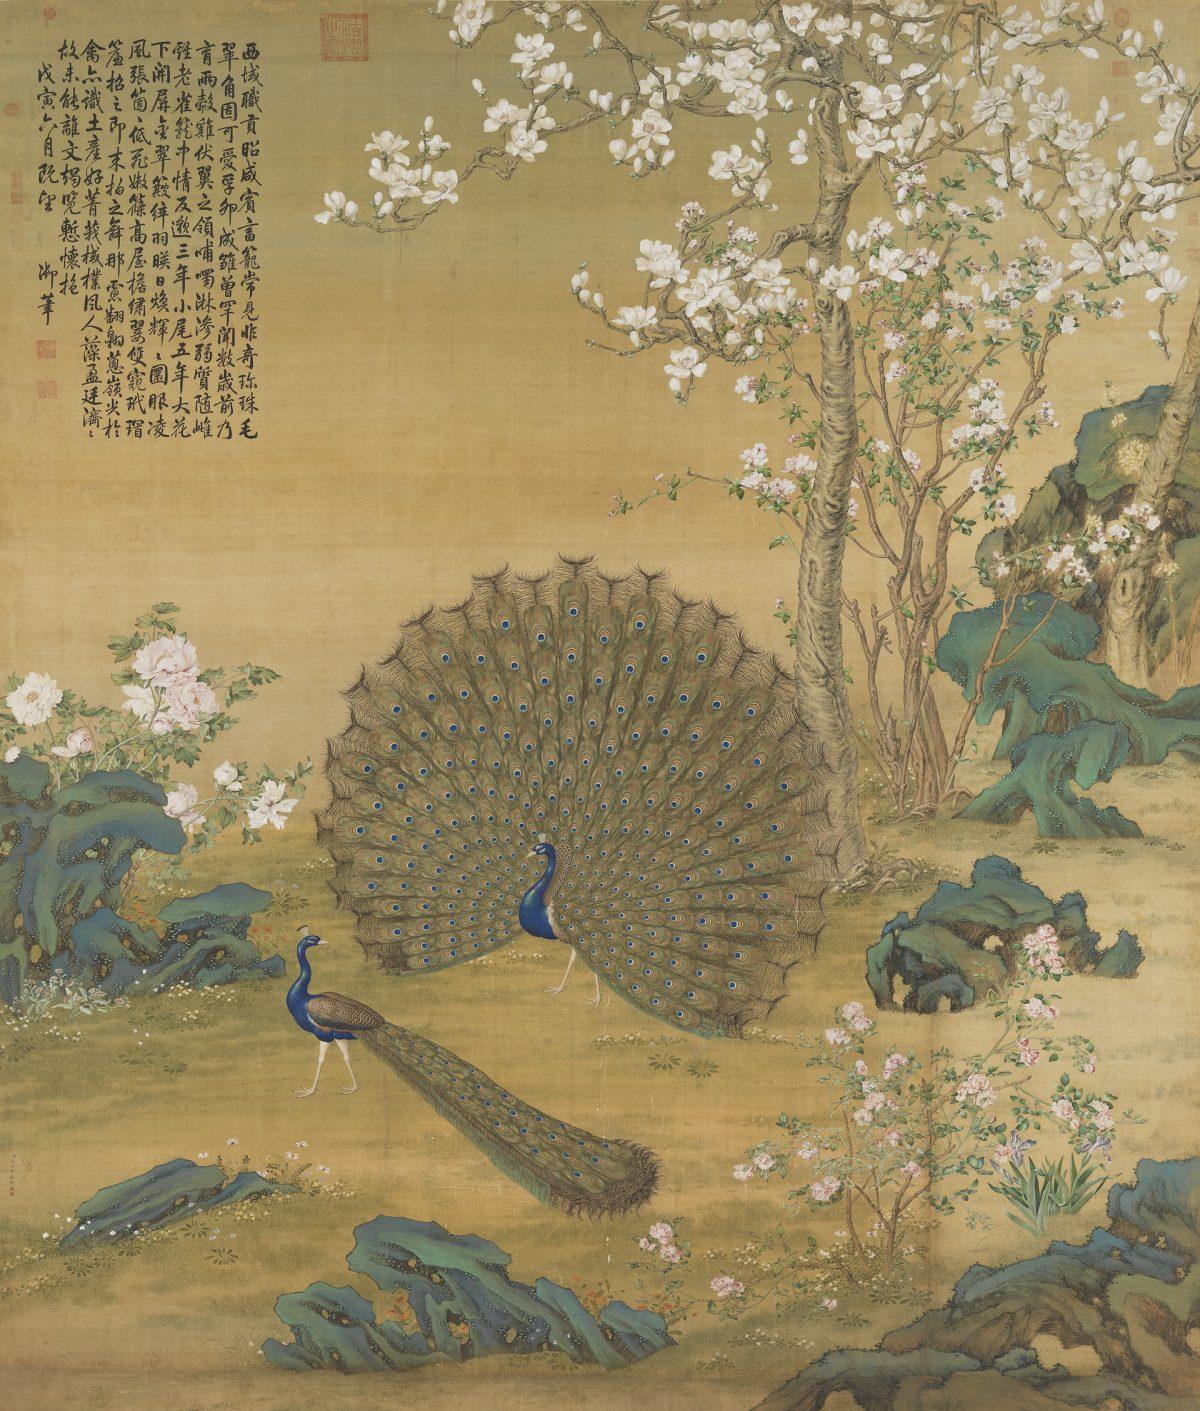 “Peacock Spreading Its Tail Feathers,” 1758, by Giuseppe Castiglione (aka Lang Shining; 1688–1766). Ink and color on silk hanging scroll, 129.1 inches by 111 inches. (National Palace Museum, Taipei)